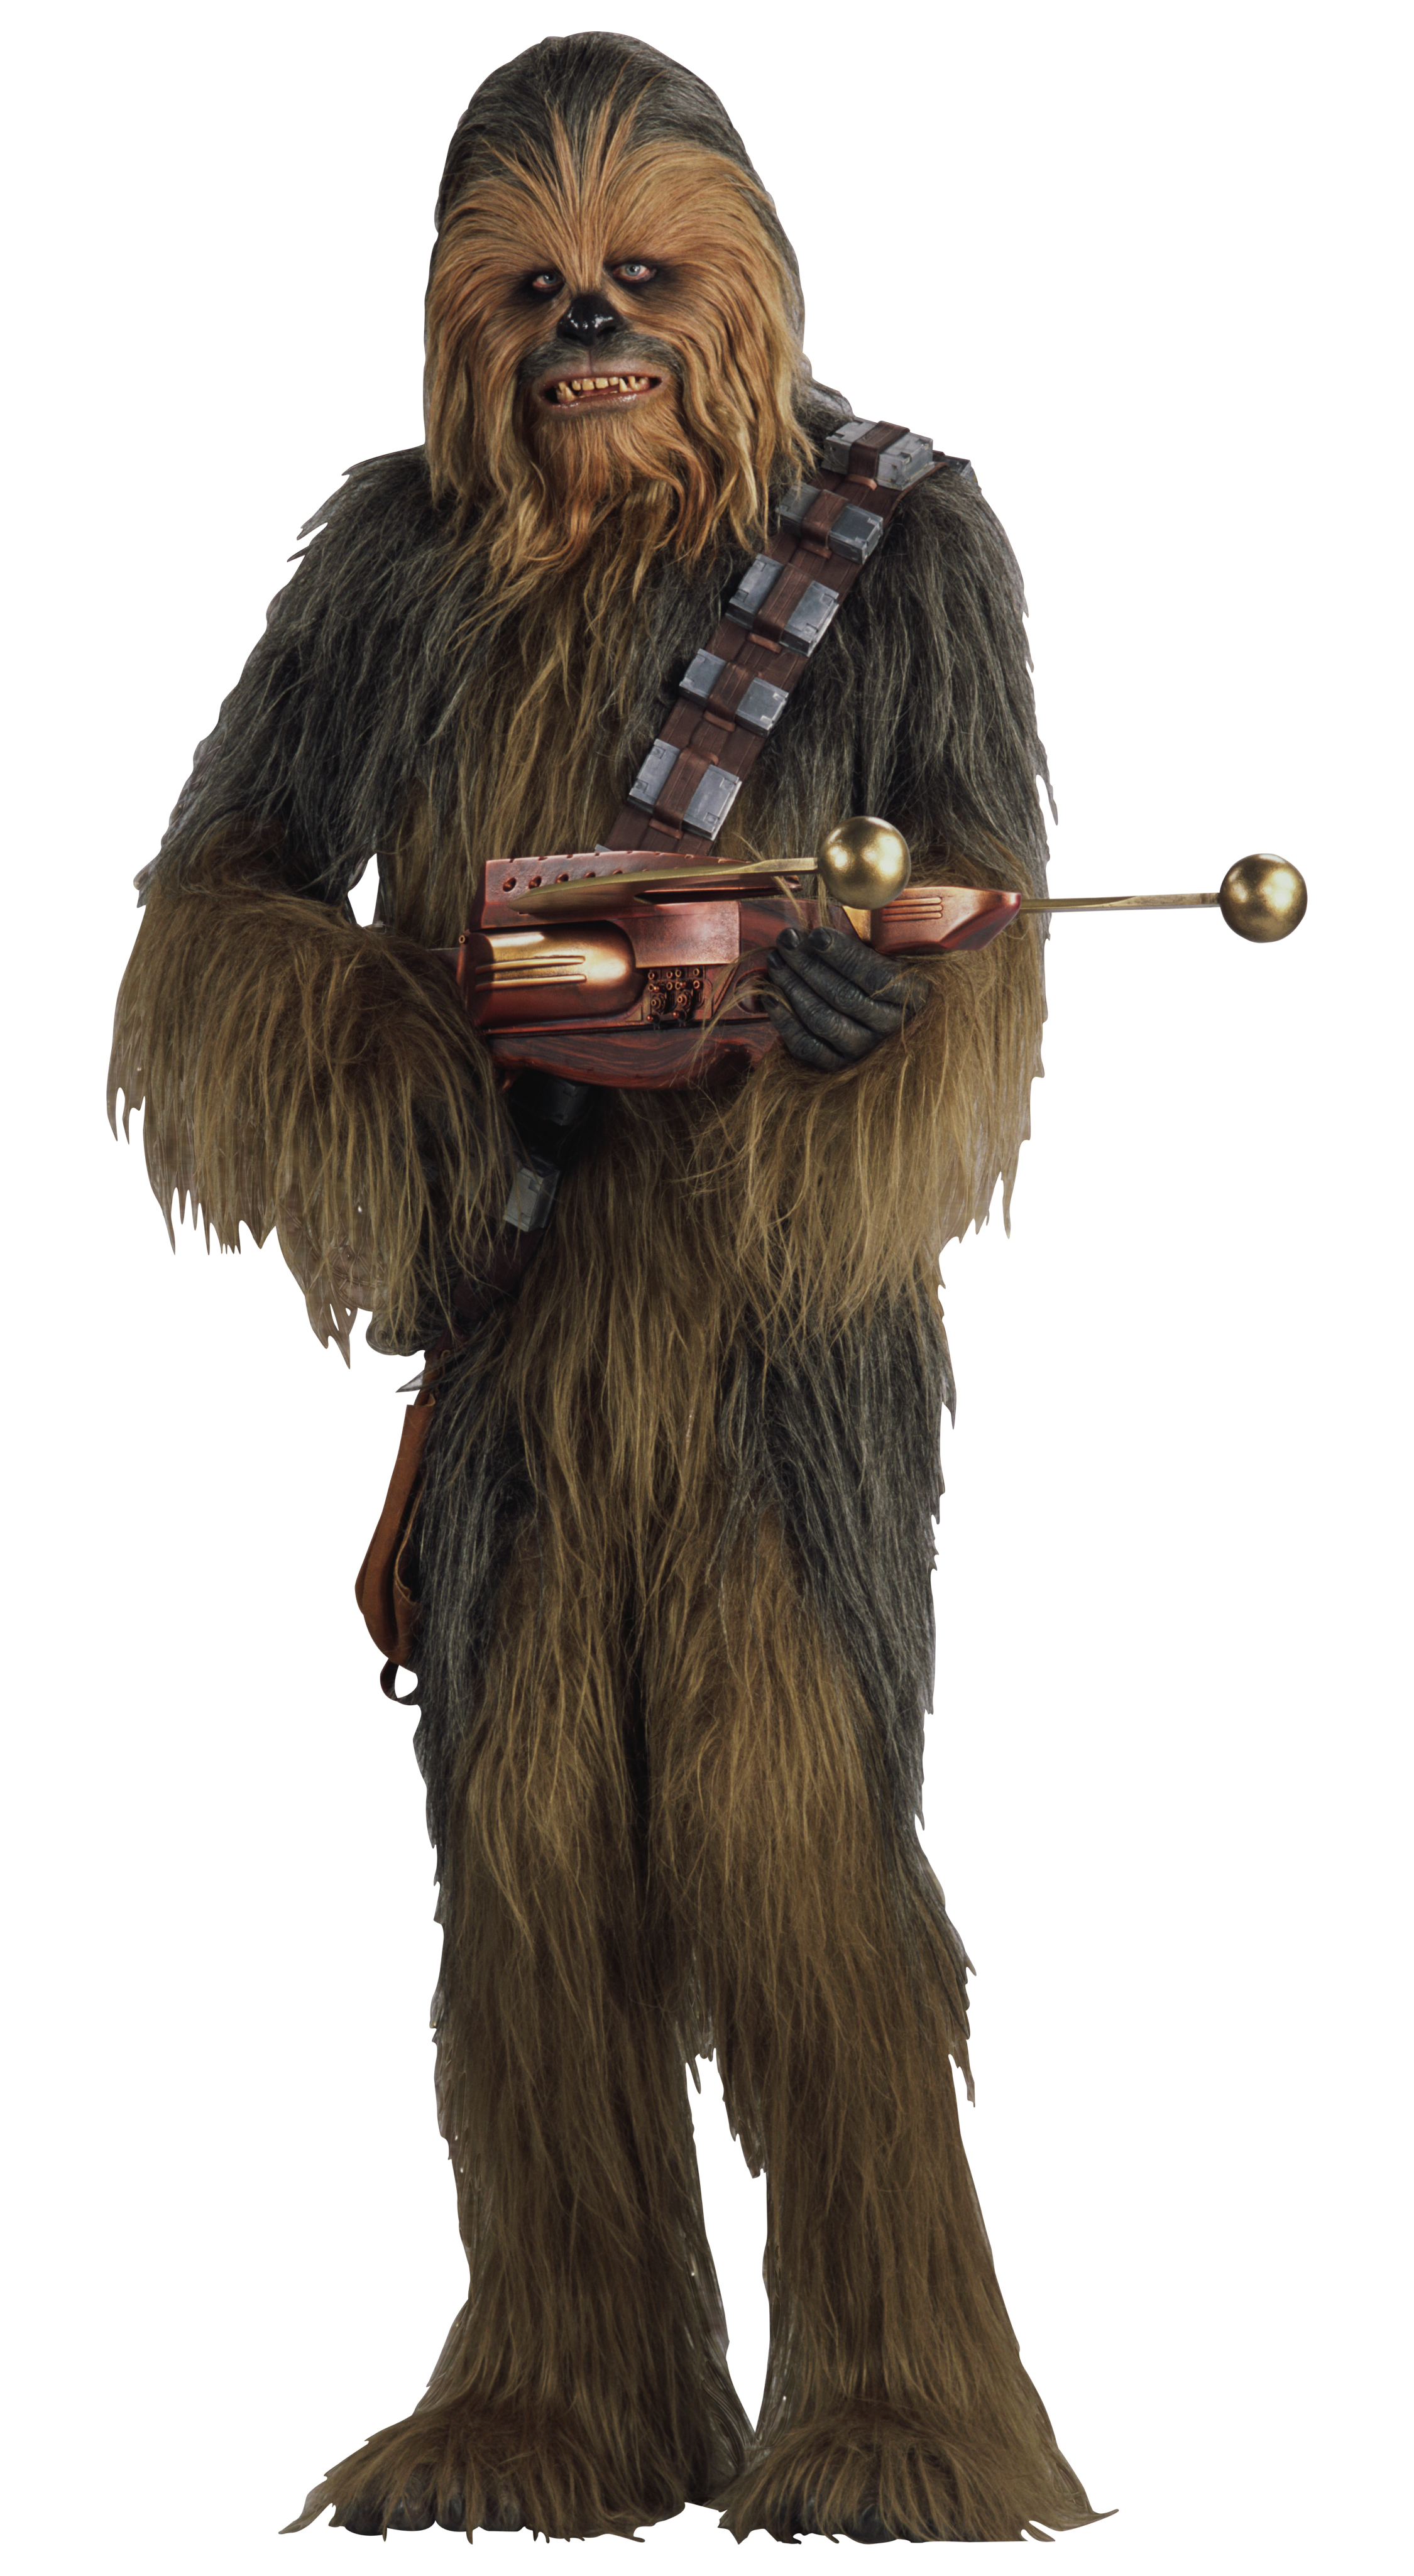 Who are the Wookiees in Star Wars?